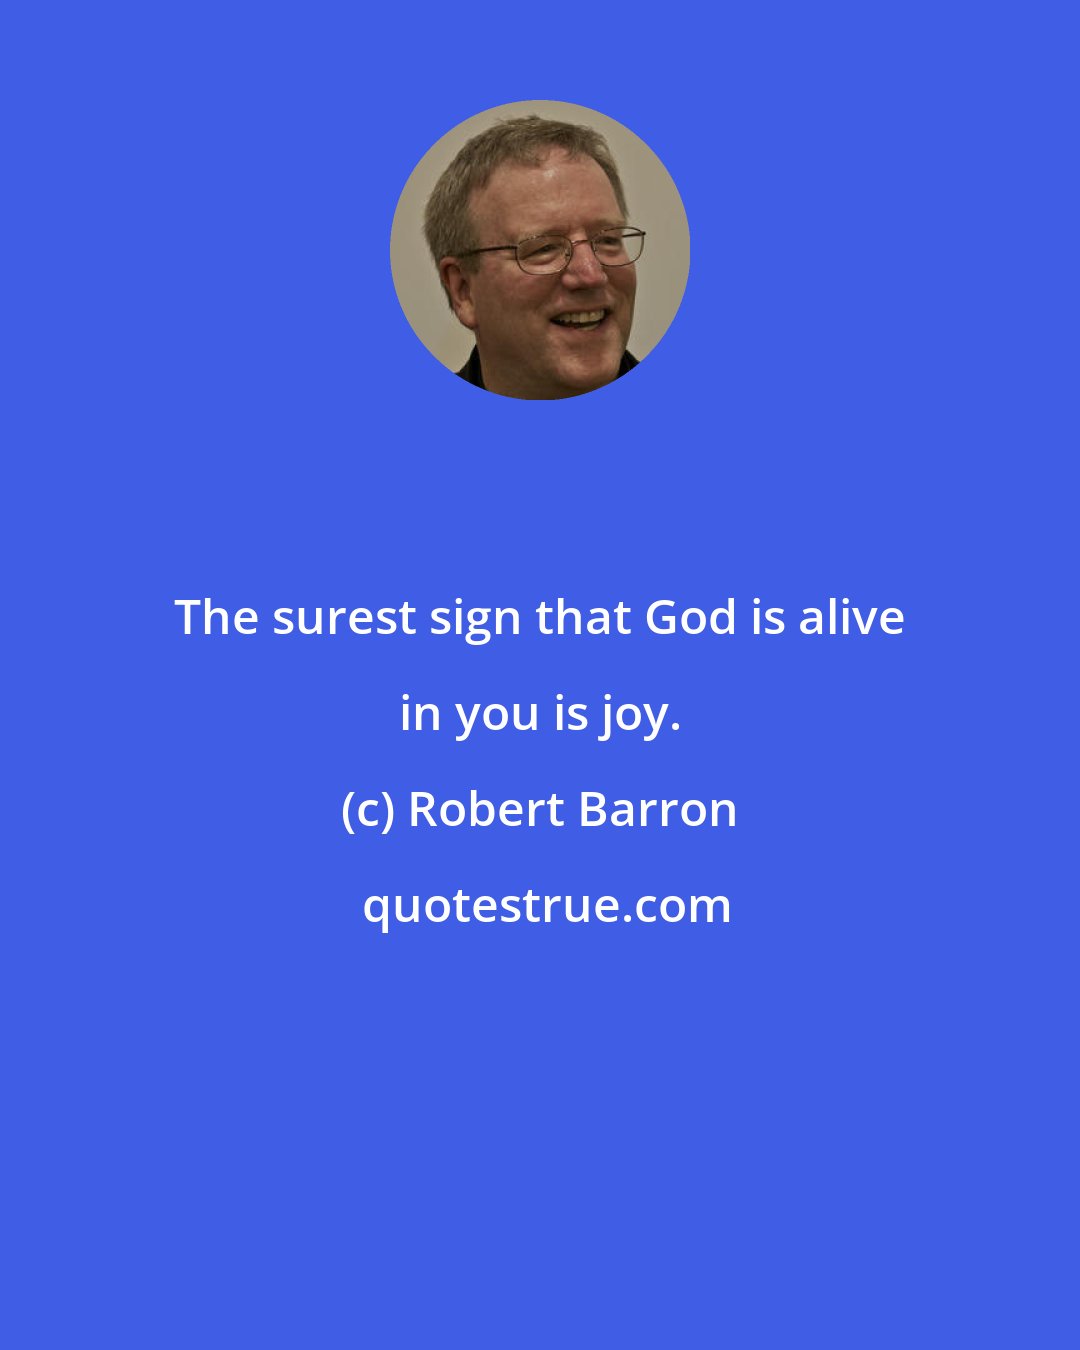 Robert Barron: The surest sign that God is alive in you is joy.